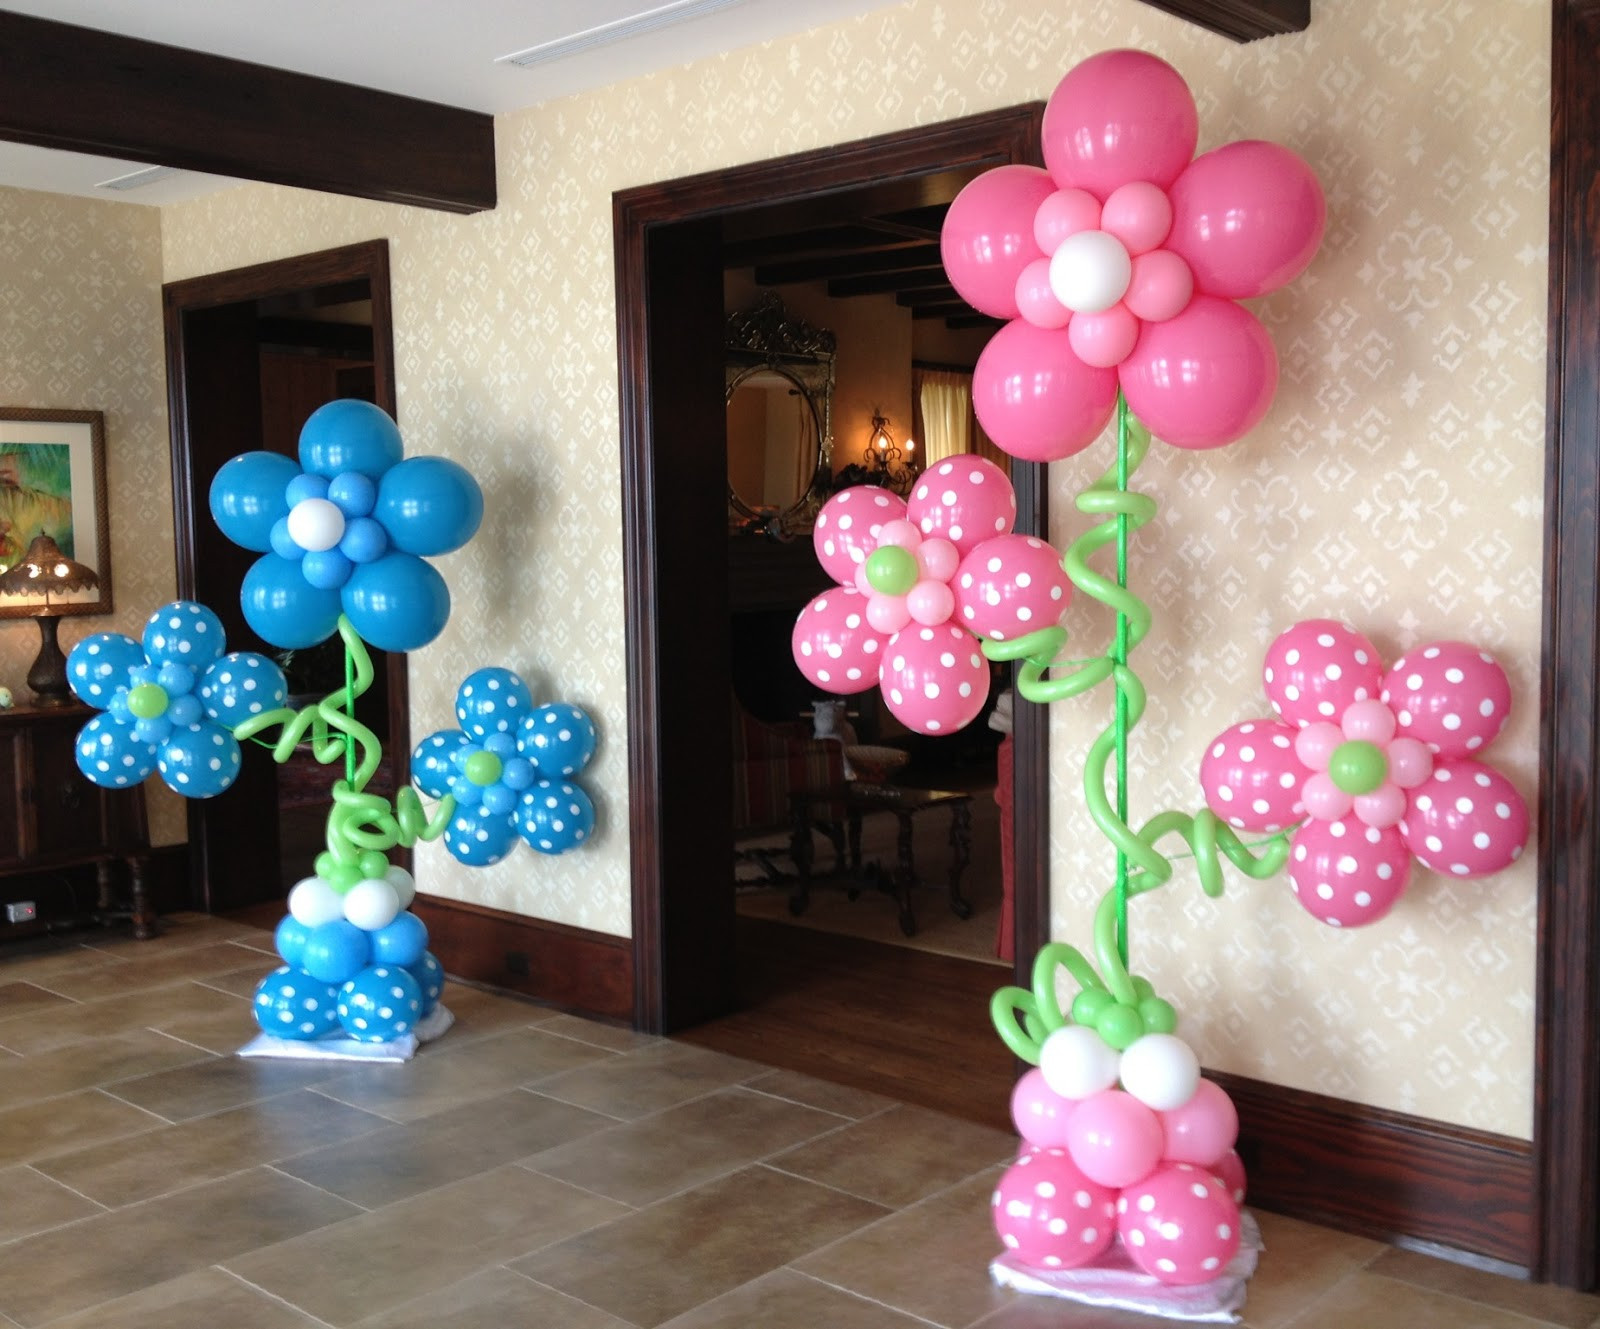 Balloons Decoration For Birthday Party
 DIY Ideas For Kids’ Party